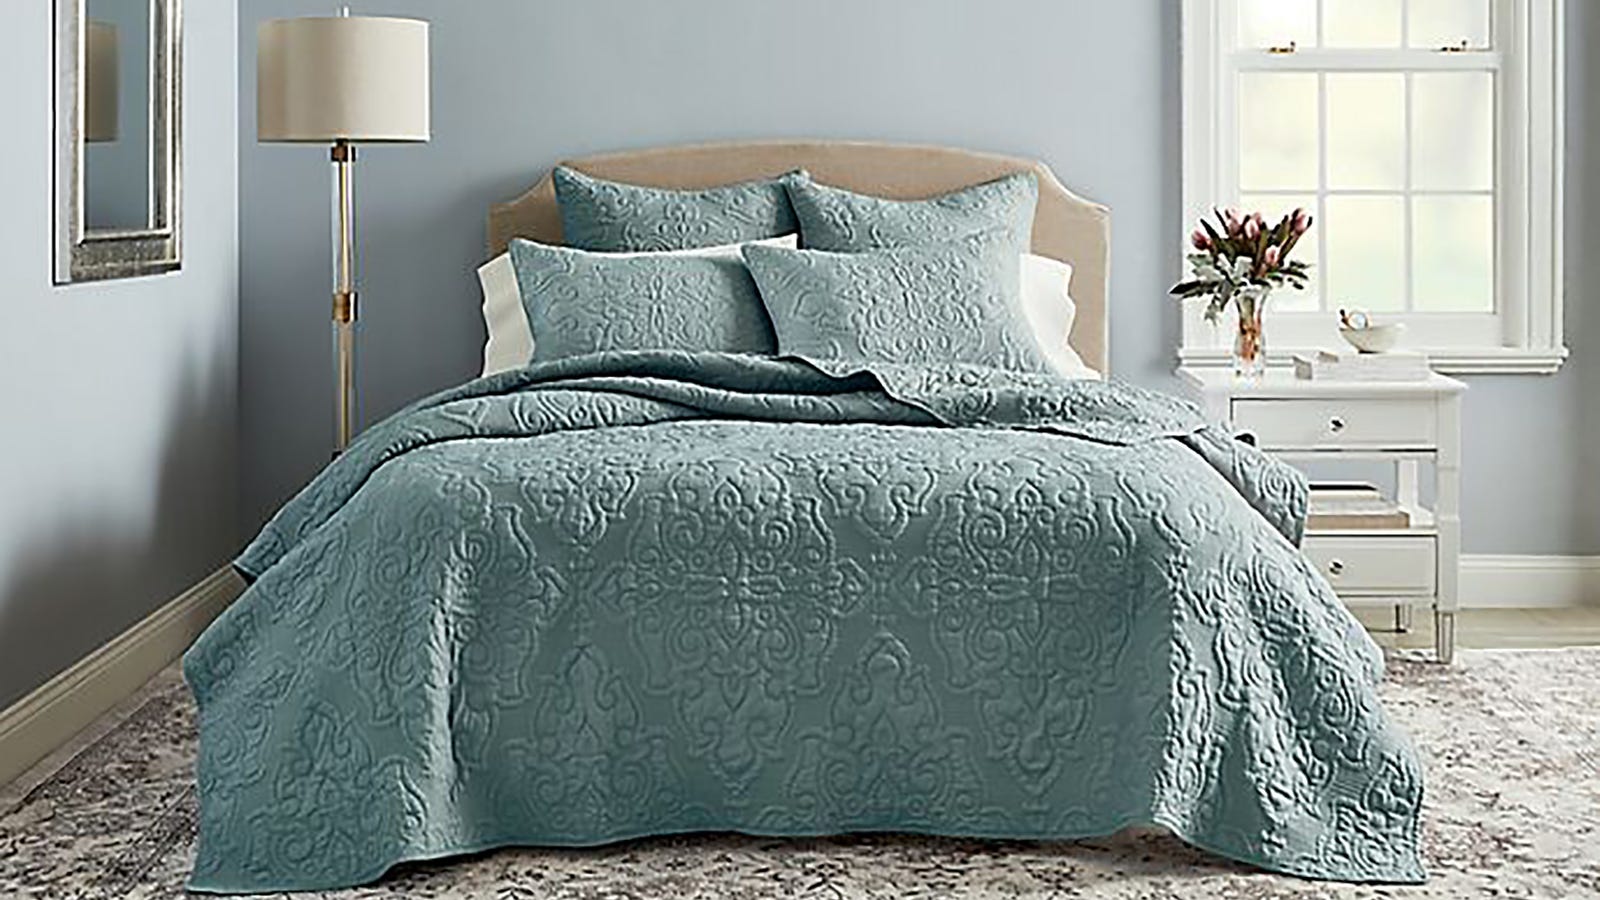 Bed Bath Beyond Get A Comforter For, Bed Bath Beyond Duvet Covers King